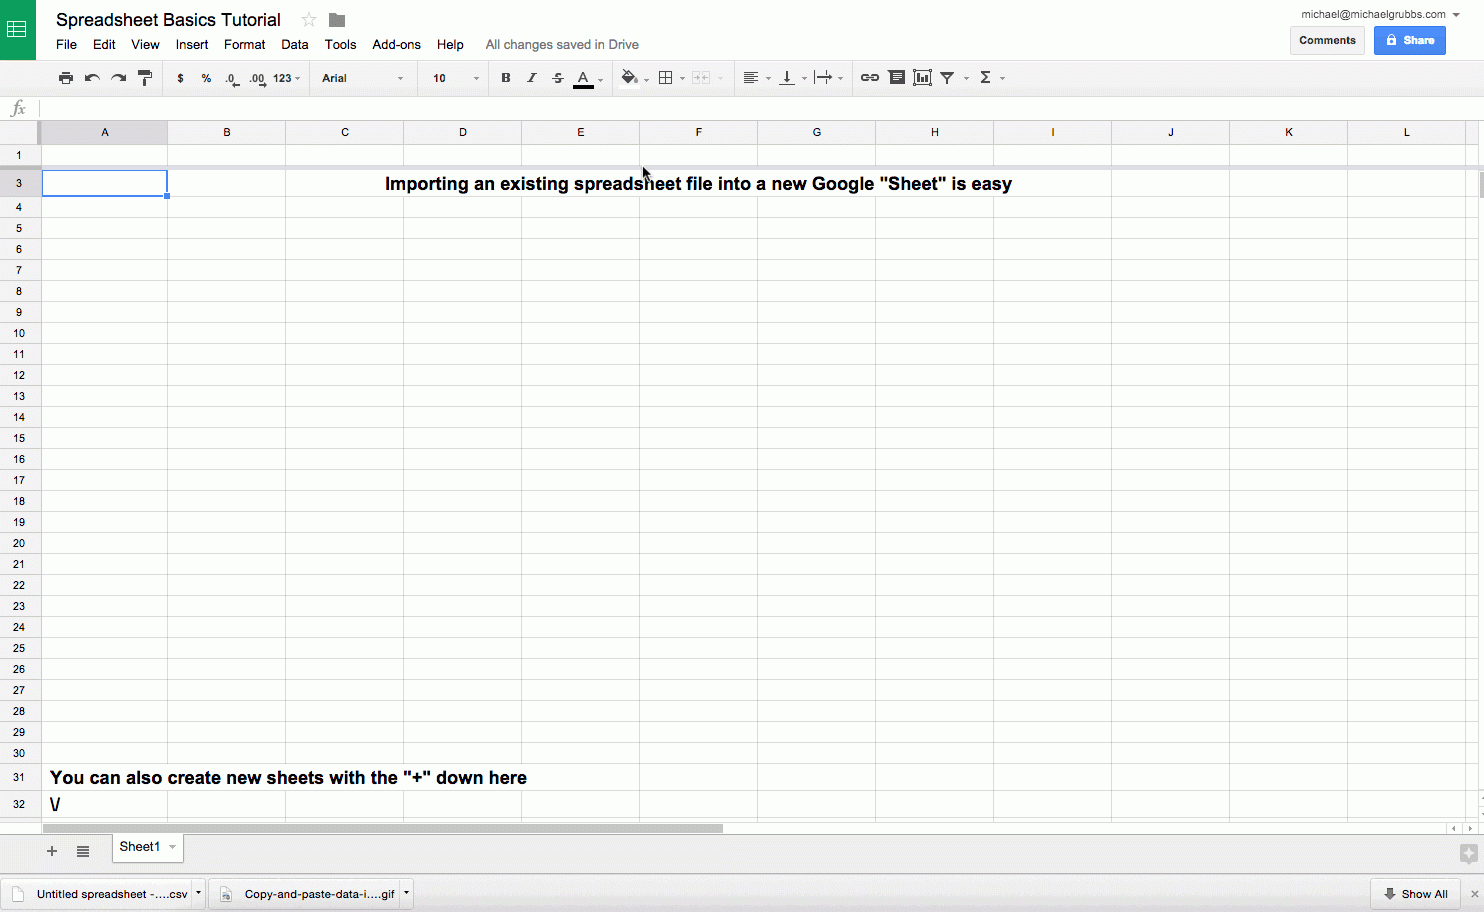 View Spreadsheet Online For Google Sheets 101: The Beginner's Guide To Online Spreadsheets  The